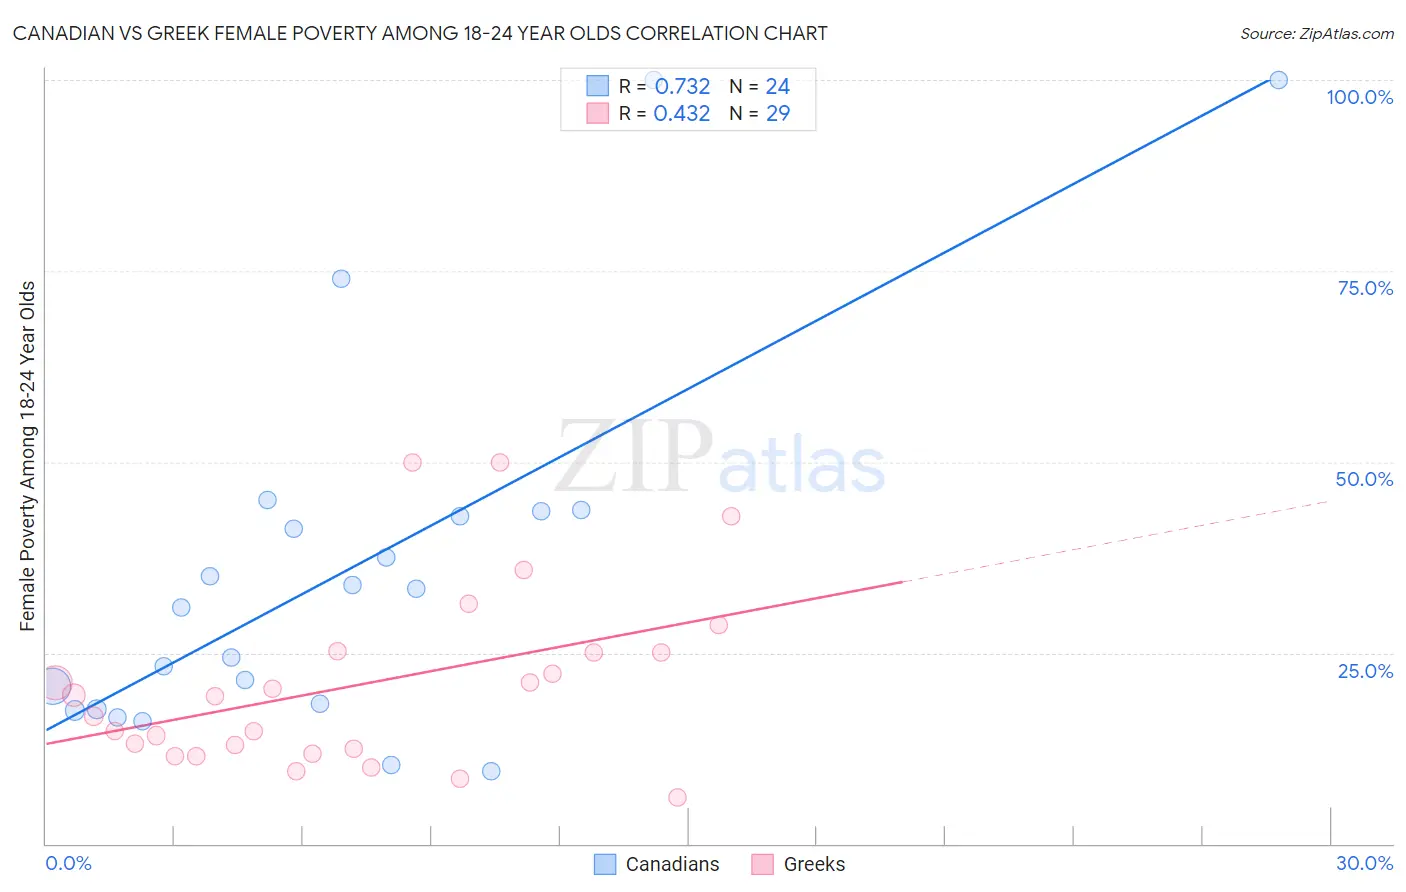 Canadian vs Greek Female Poverty Among 18-24 Year Olds